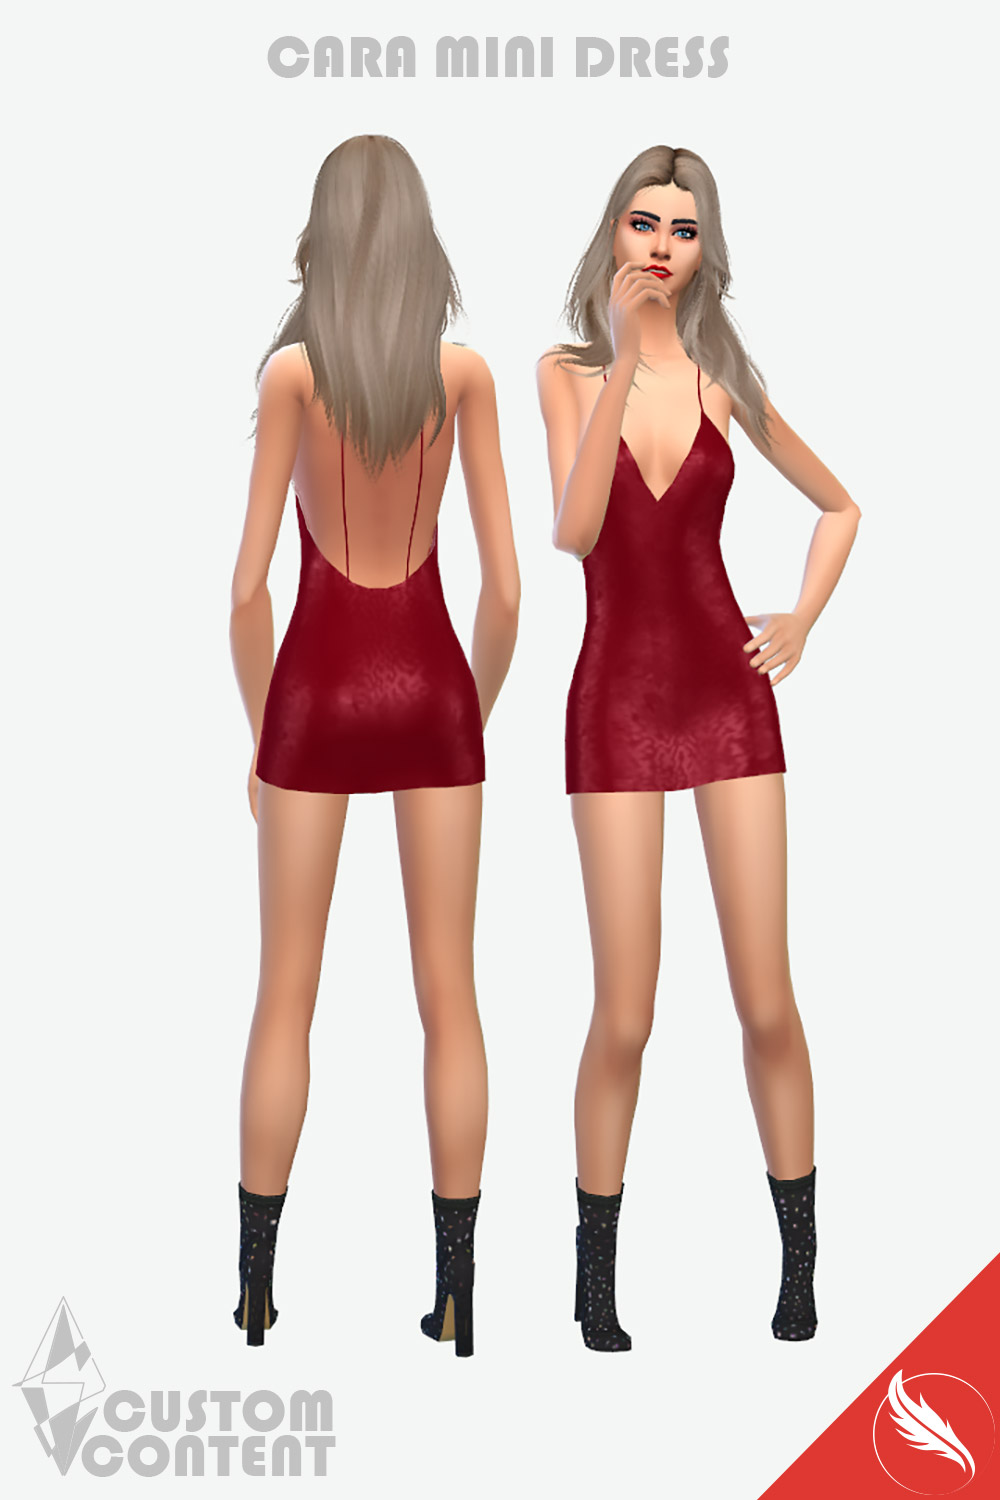 The Sims 4 Party Mini Dress Custom Content